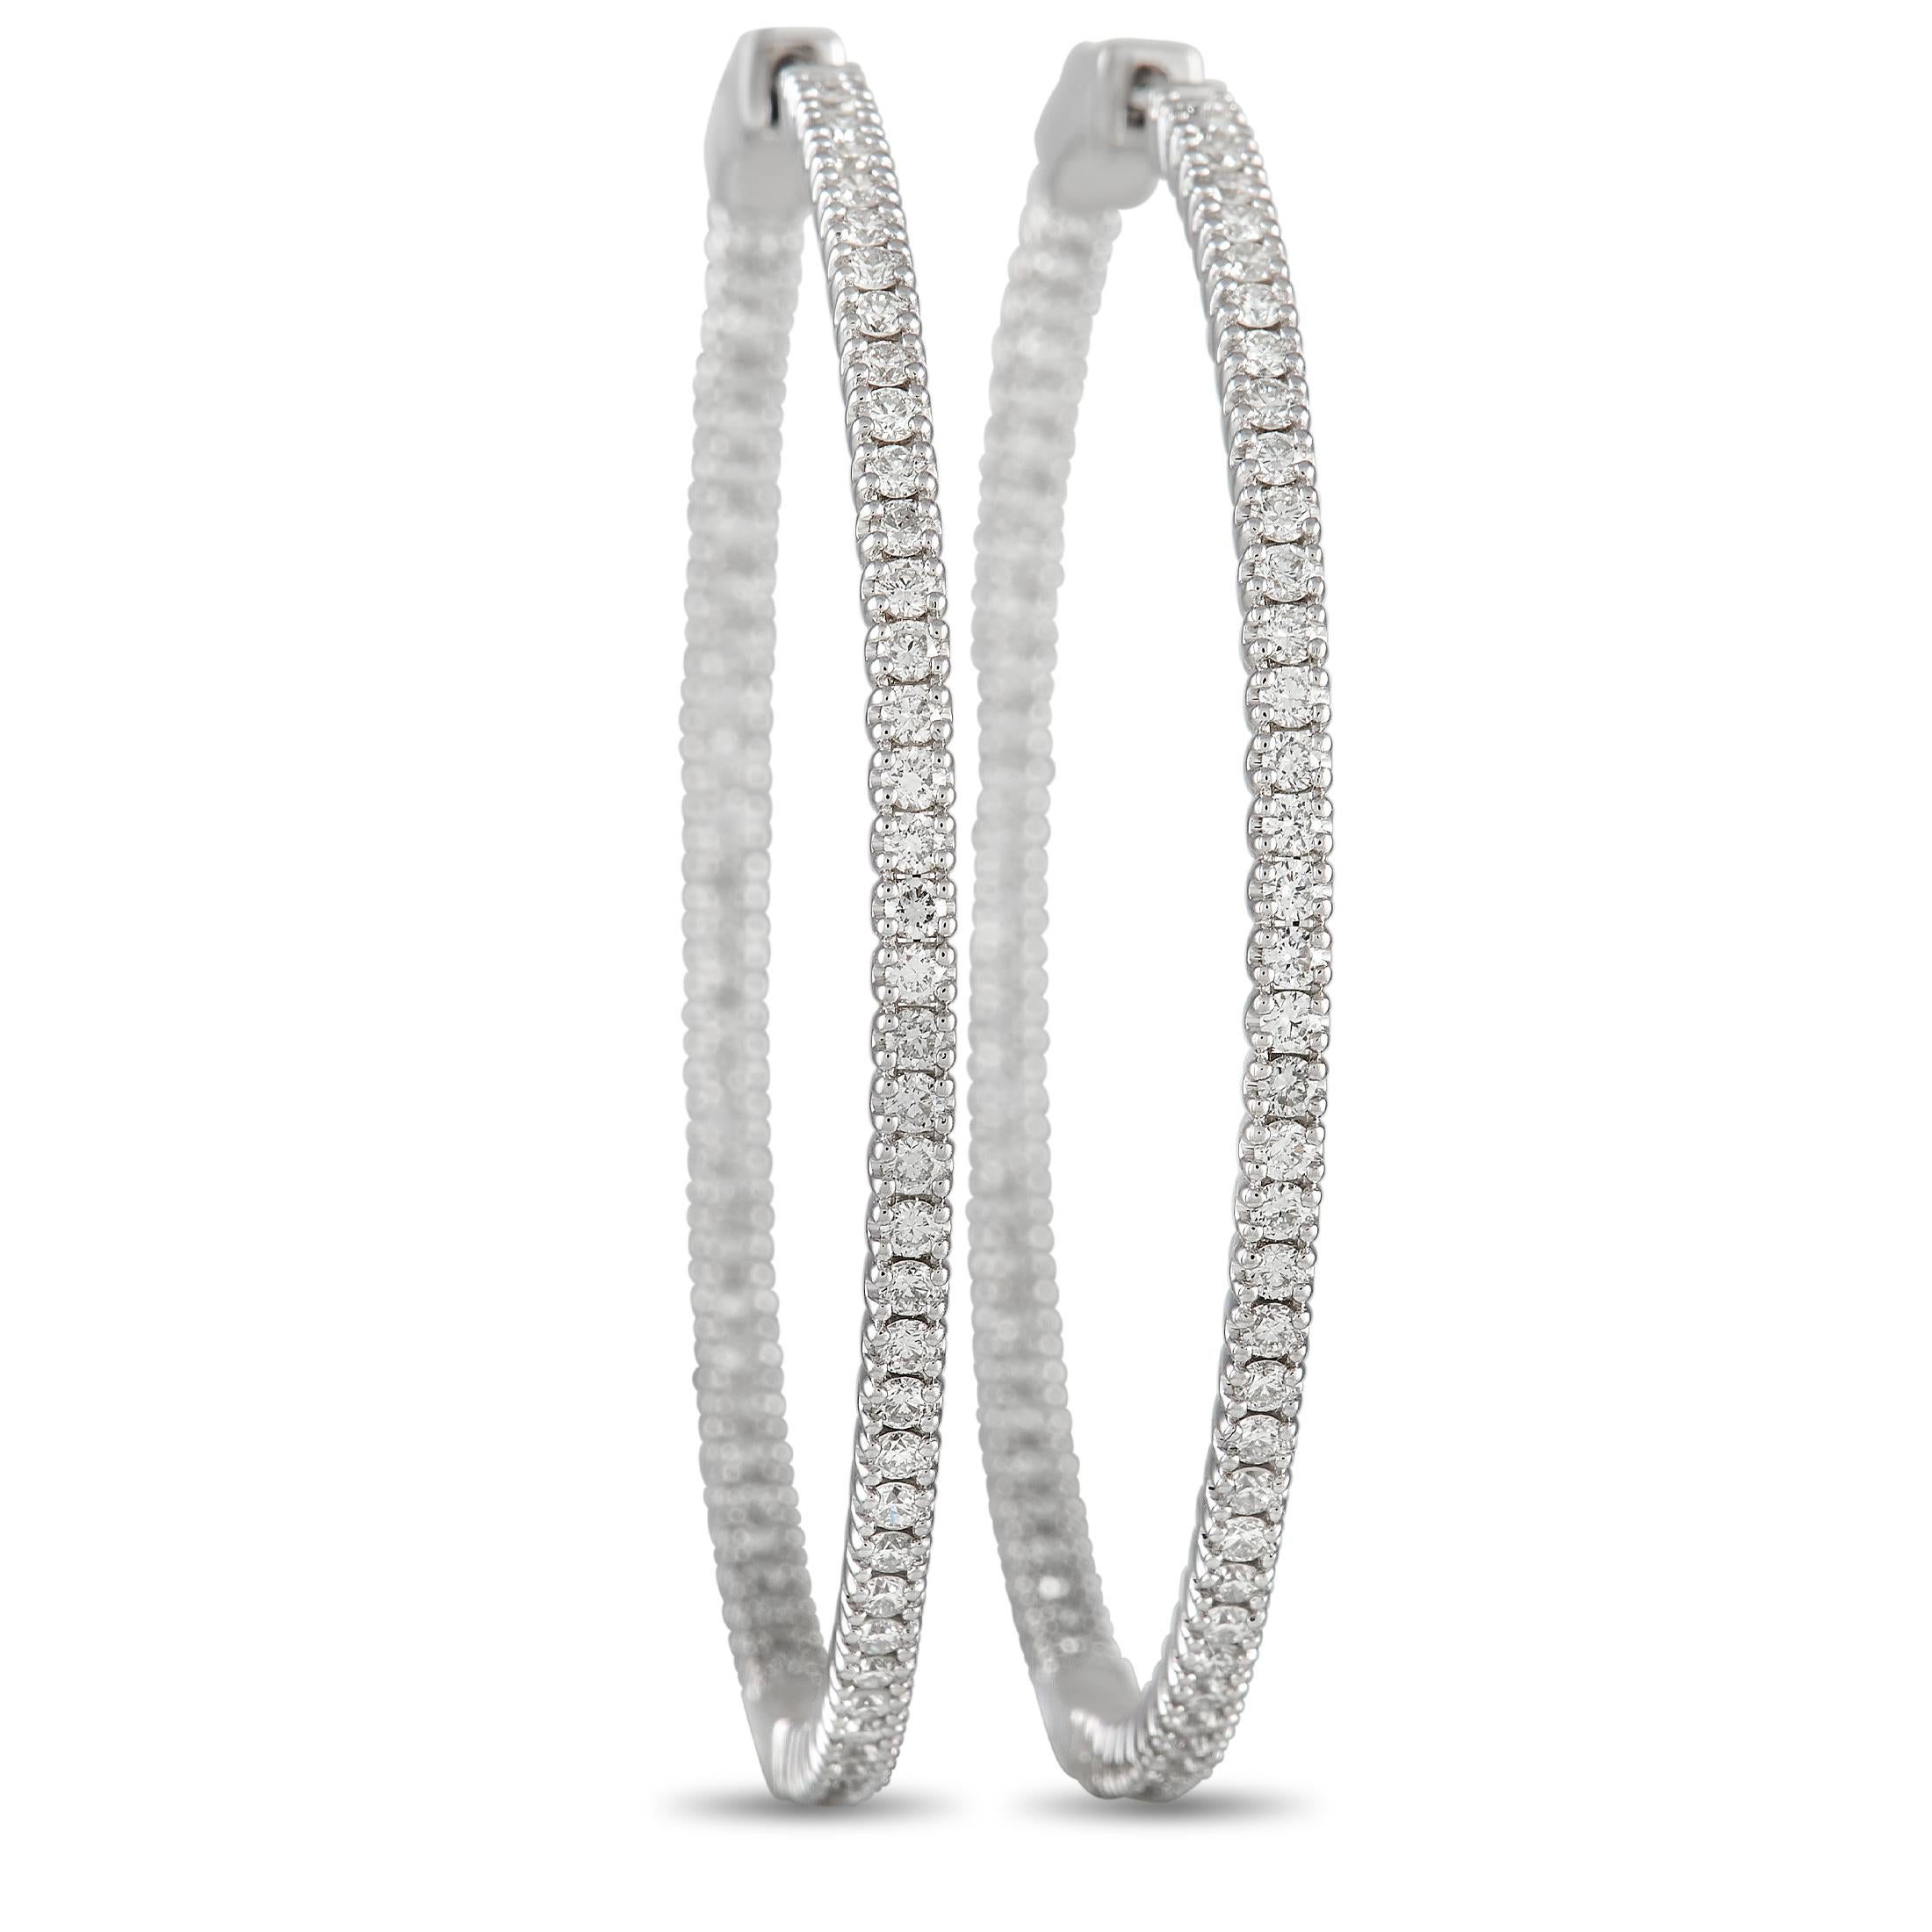 LB Exclusive 14K White Gold 1.77ct Diamond Inside-Hoop Earrings In New Condition For Sale In Southampton, PA